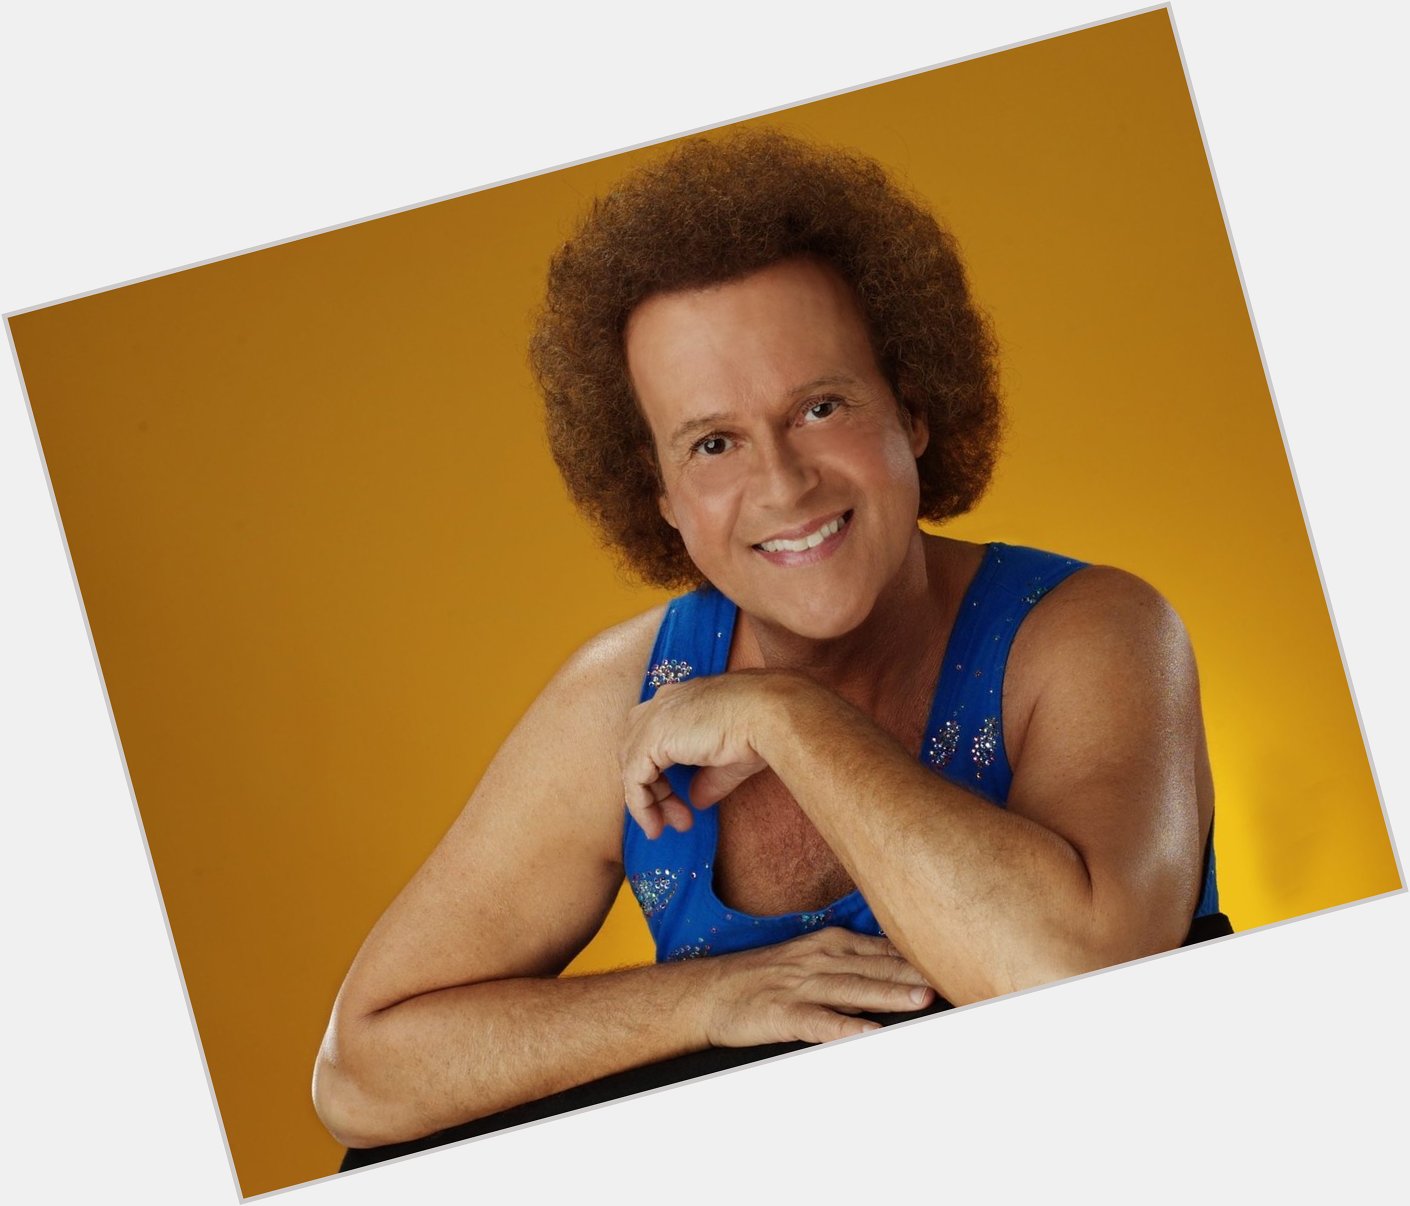 Happy 72nd Birthday to Richard Simmons! 

Did you watch his workout videos back in the day? 